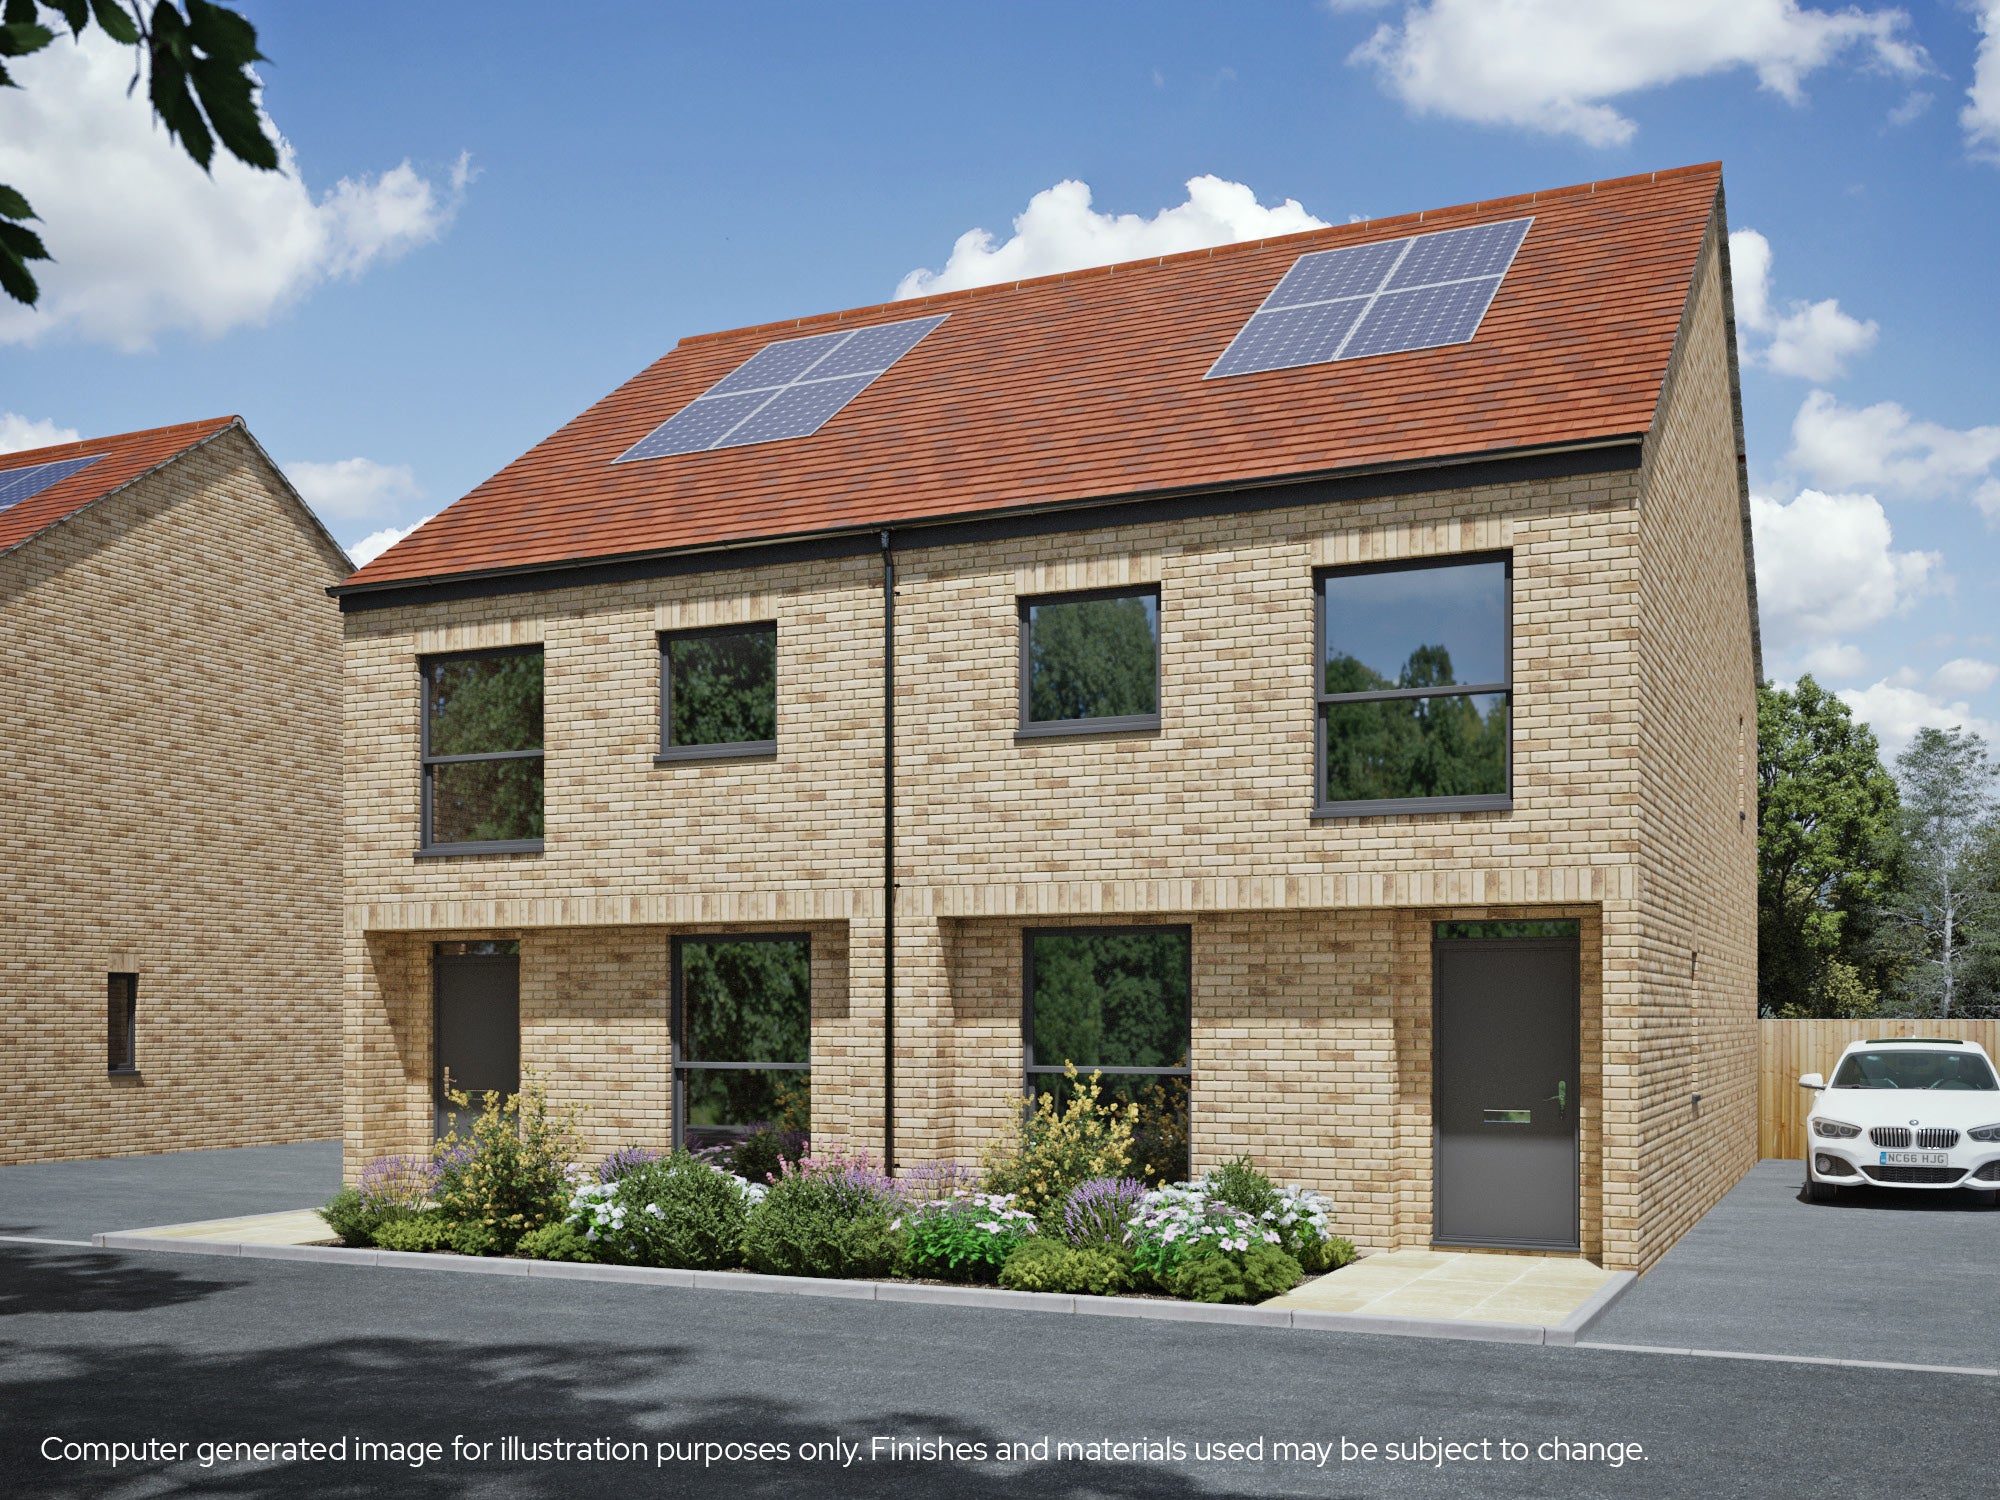 CGI showing 3 bed homes at Priory Grove, Oxford